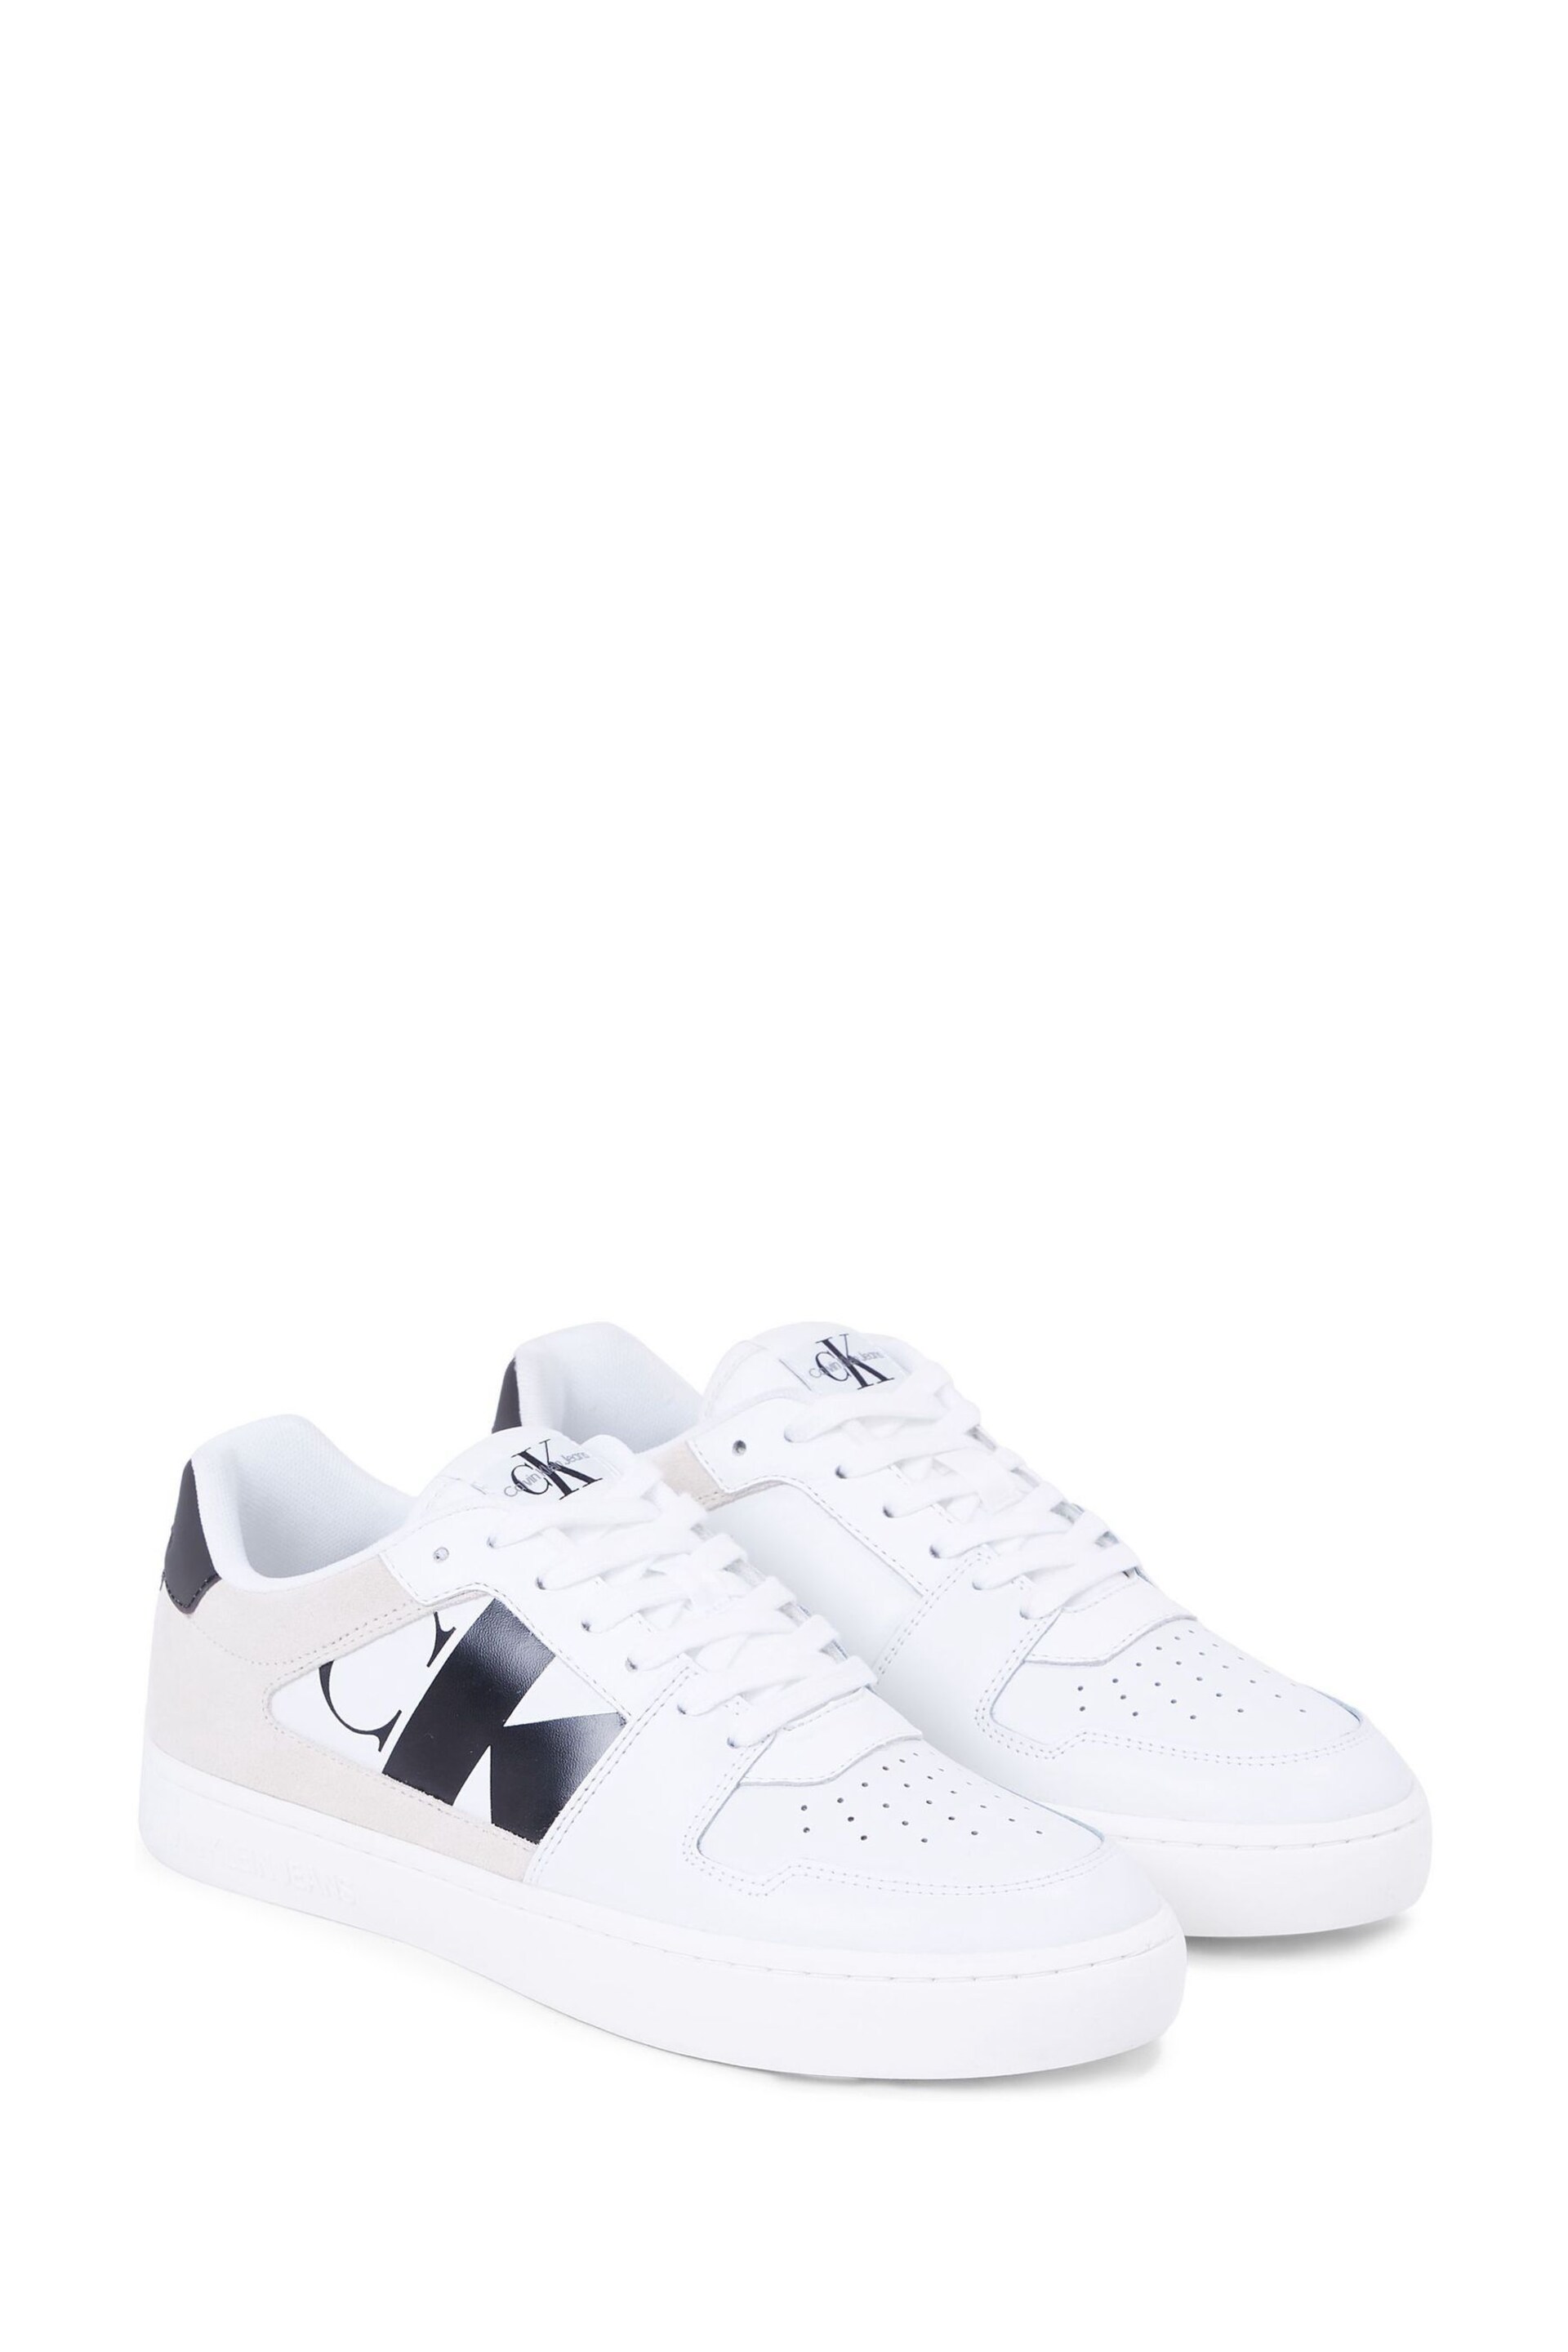 Calvin Klein White Classic Cupsole Low Lace-Up Trainers - Image 1 of 4